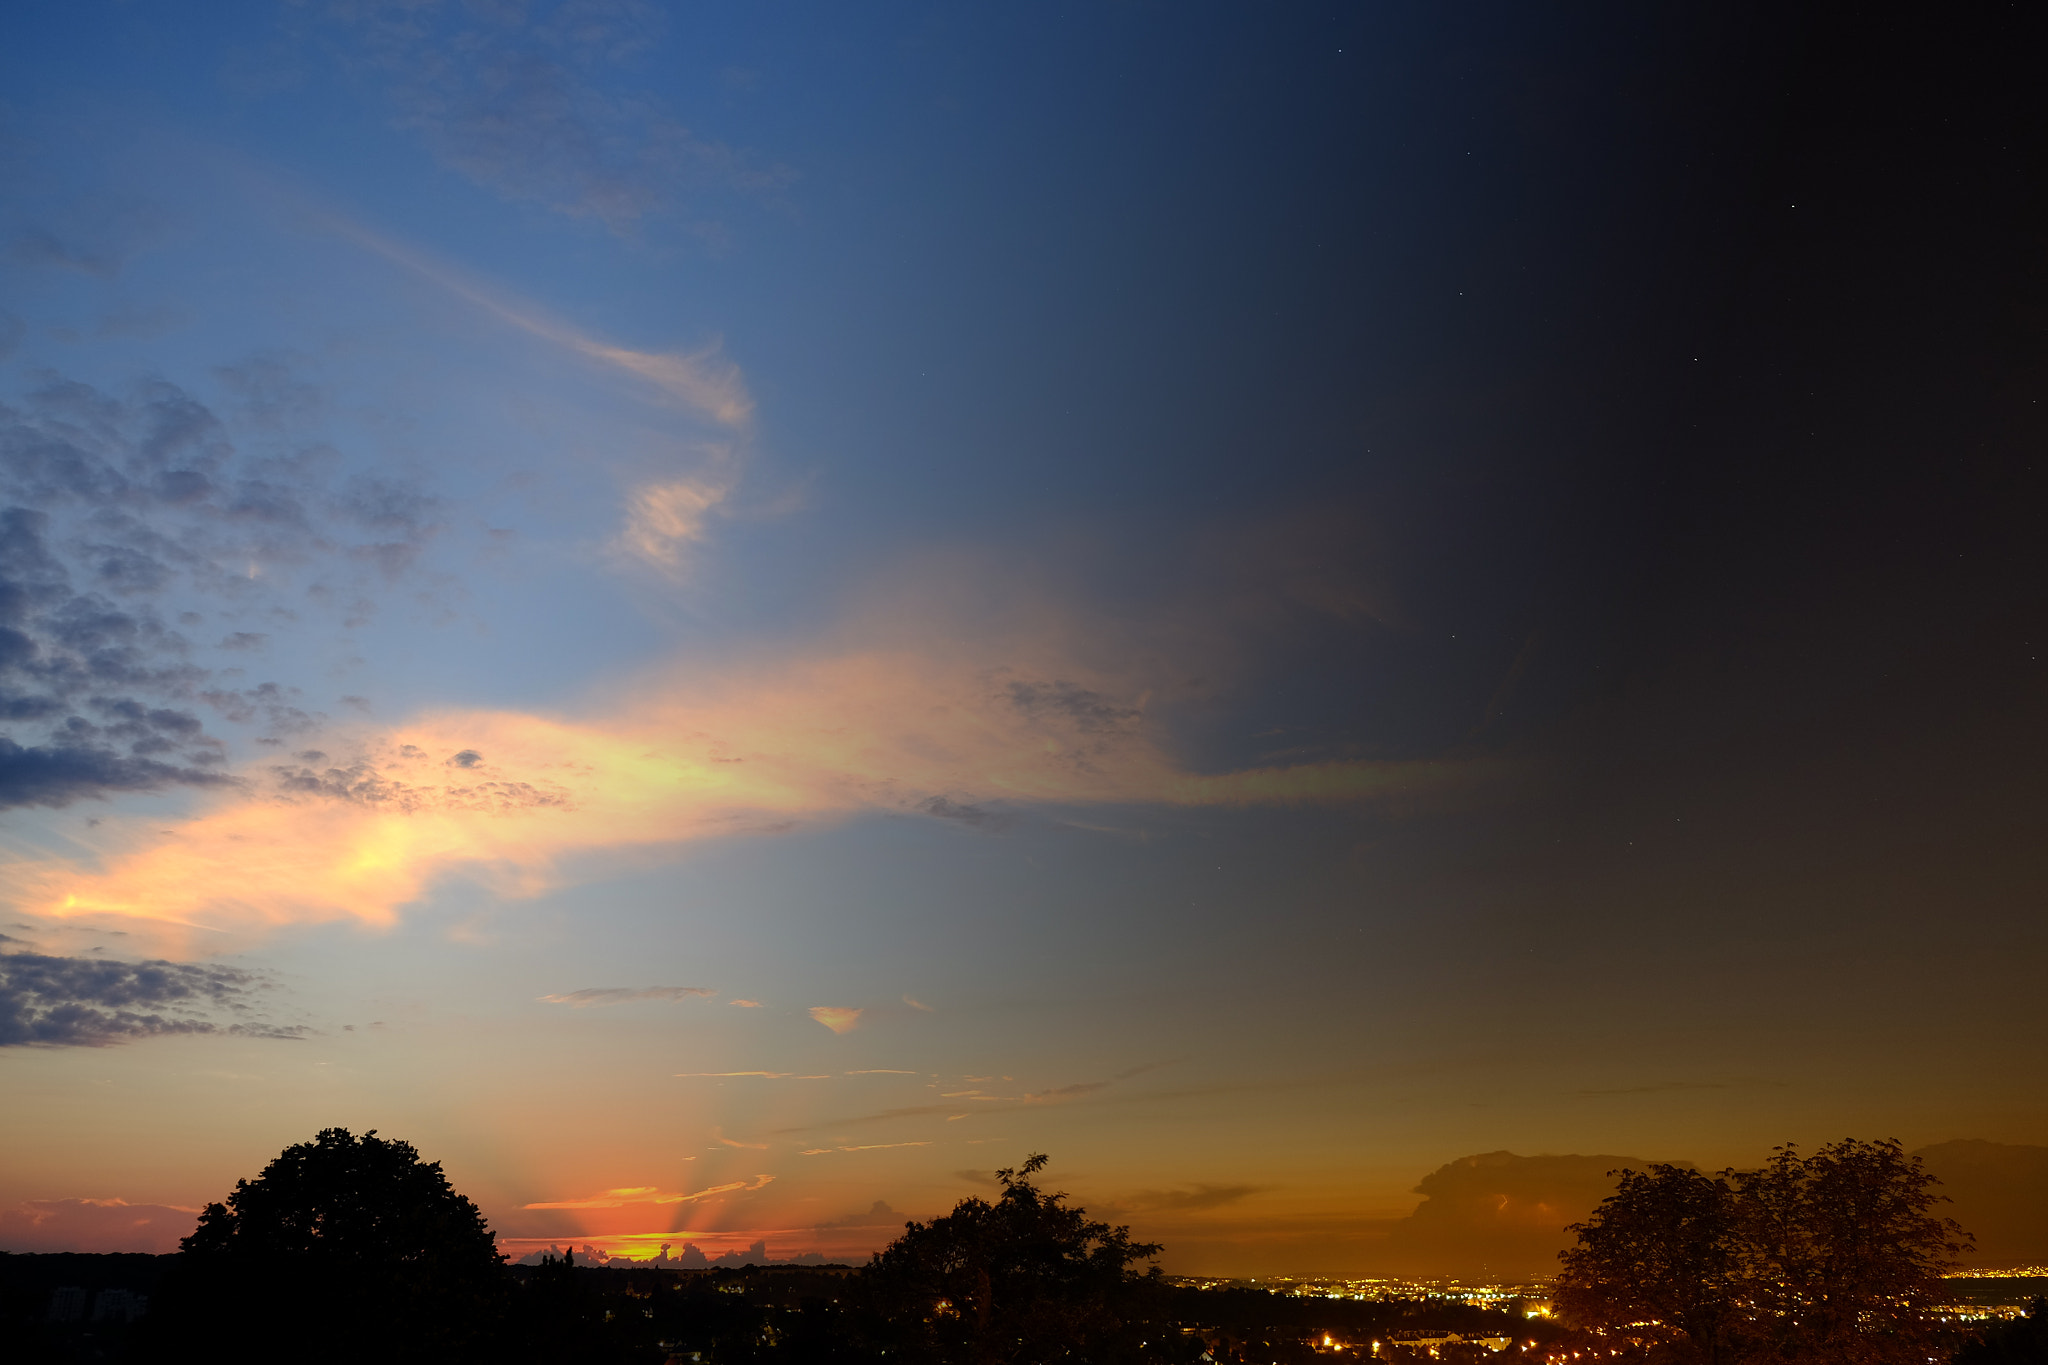 Fujifilm X-M1 + Fujifilm XF 18-55mm F2.8-4 R LM OIS sample photo. Little cloud at sunset gave a big storm at night photography